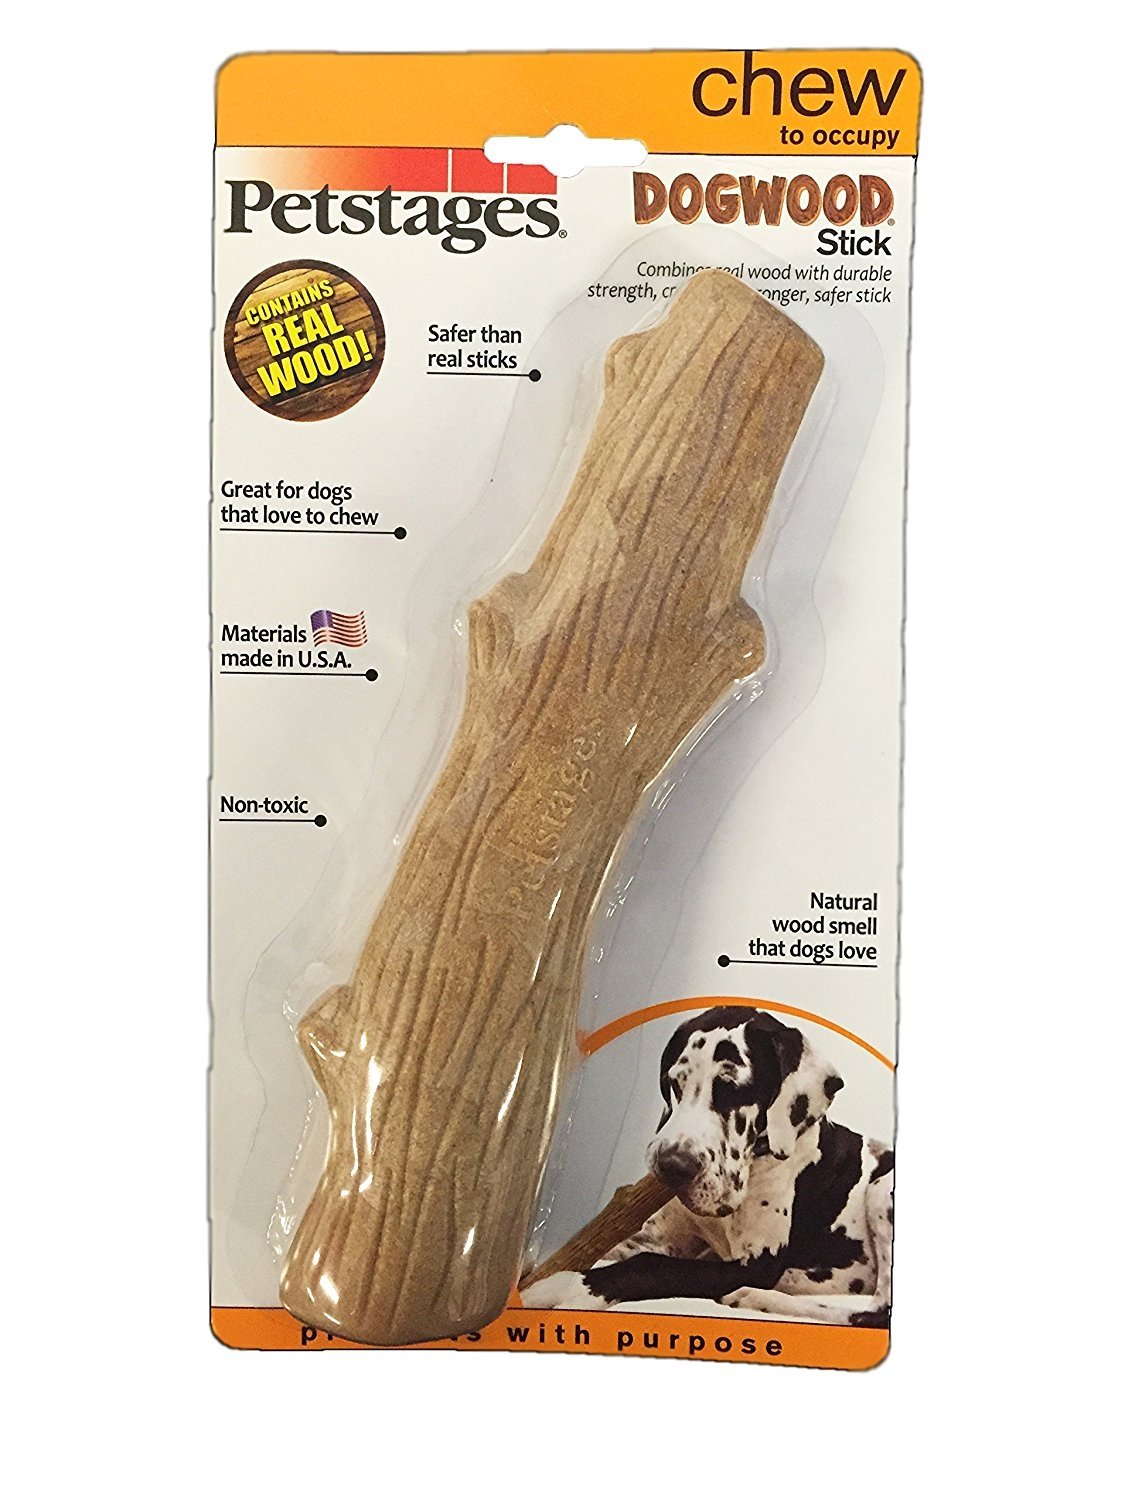 Dogwood Durable Real Wood Dog Chew Toy for Large Dogs, Safe and Durable